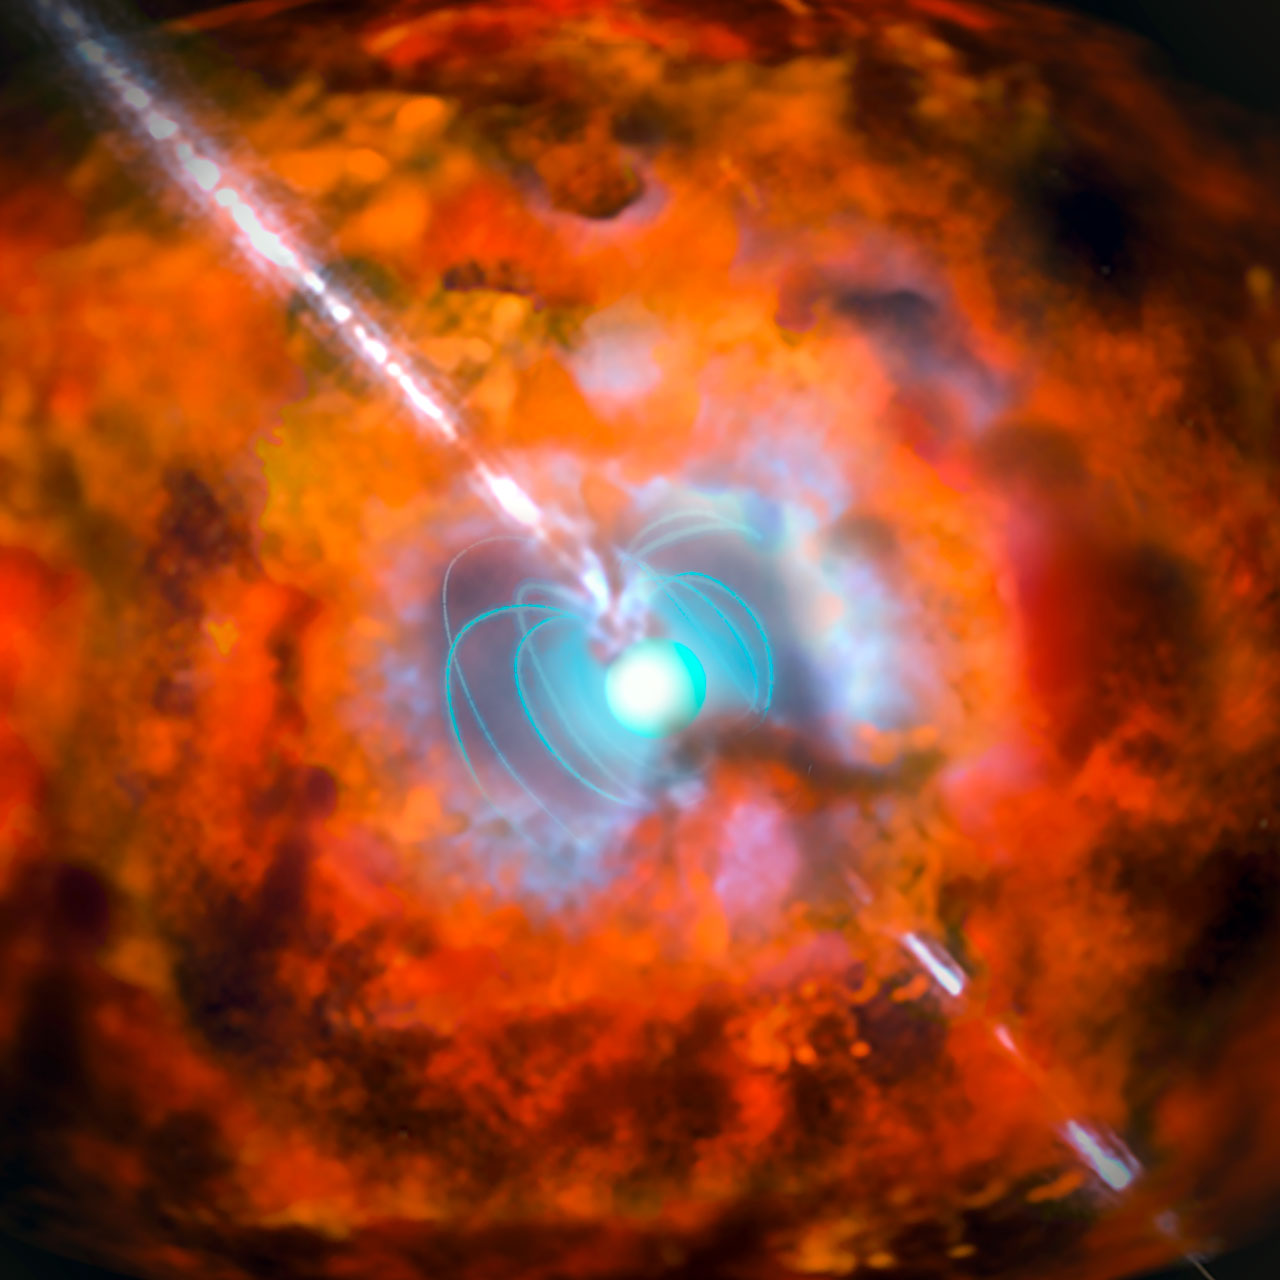 This artist’s impression shows a supernova and associated gamma-ray burst driven by a rapidly spinning neutron star with a very strong magnetic field — an exotic object known as a magnetar. Observations from ESO’s La Silla and Paranal Observatories in Chile have for the first time demonstrated a link between a very long-lasting burst of gamma rays and an unusually bright supernova explosion. The results show that the supernova following the burst GRB 111209A was not driven by radioactive decay, as expected, but was instead powered by the decaying super-strong magnetic fields around a magnetar.